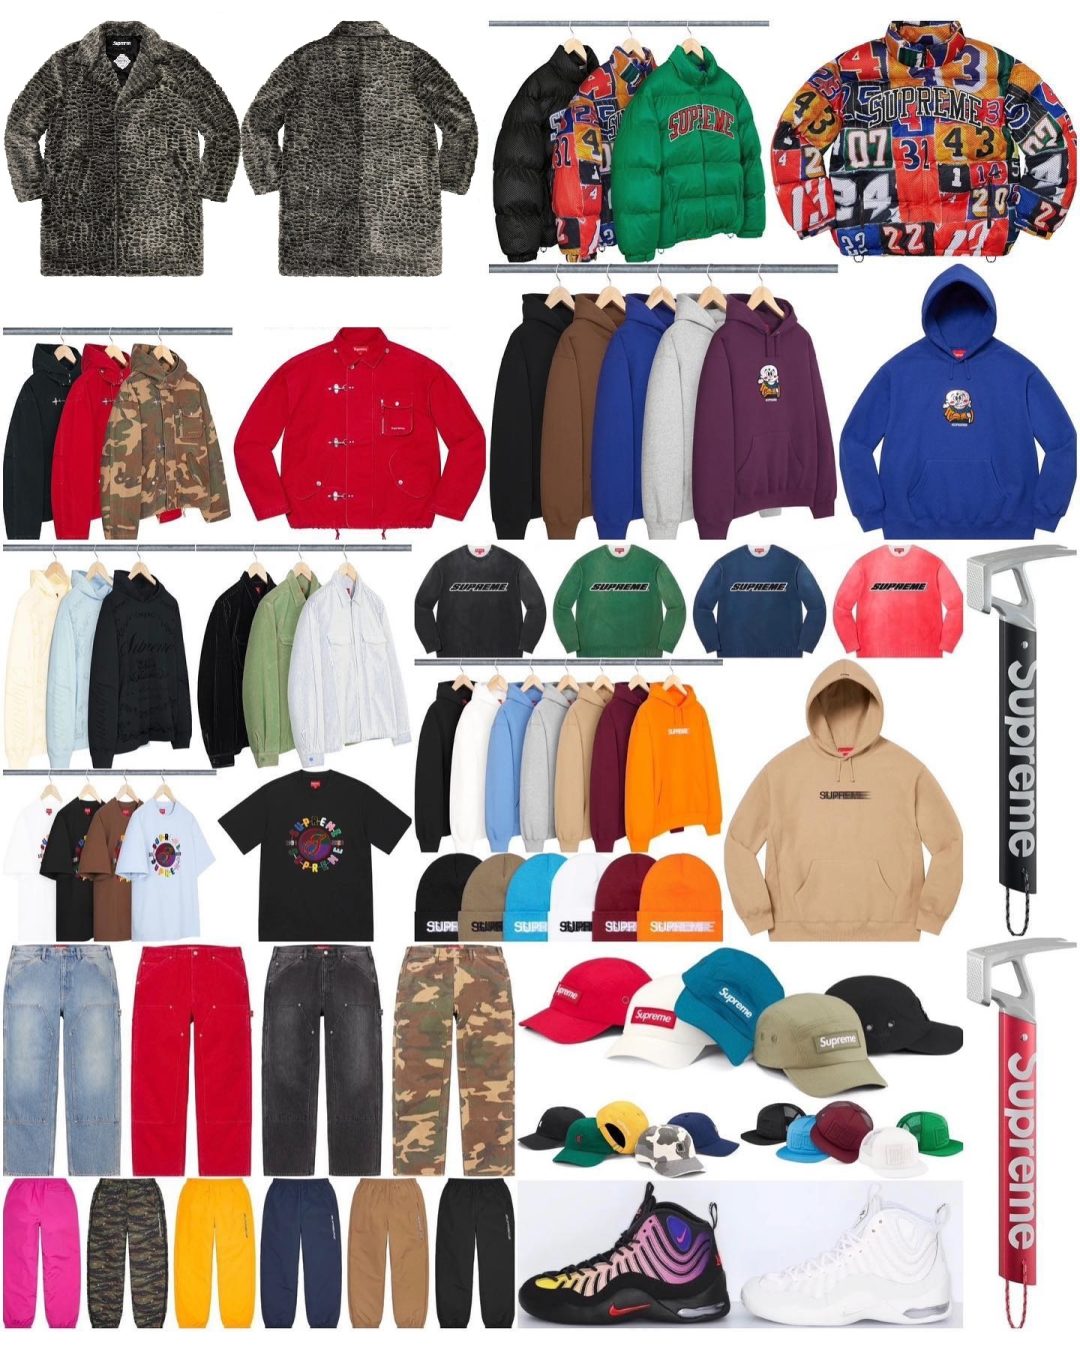 supreme-online-store-20230304-week2-23ss-release-items-list